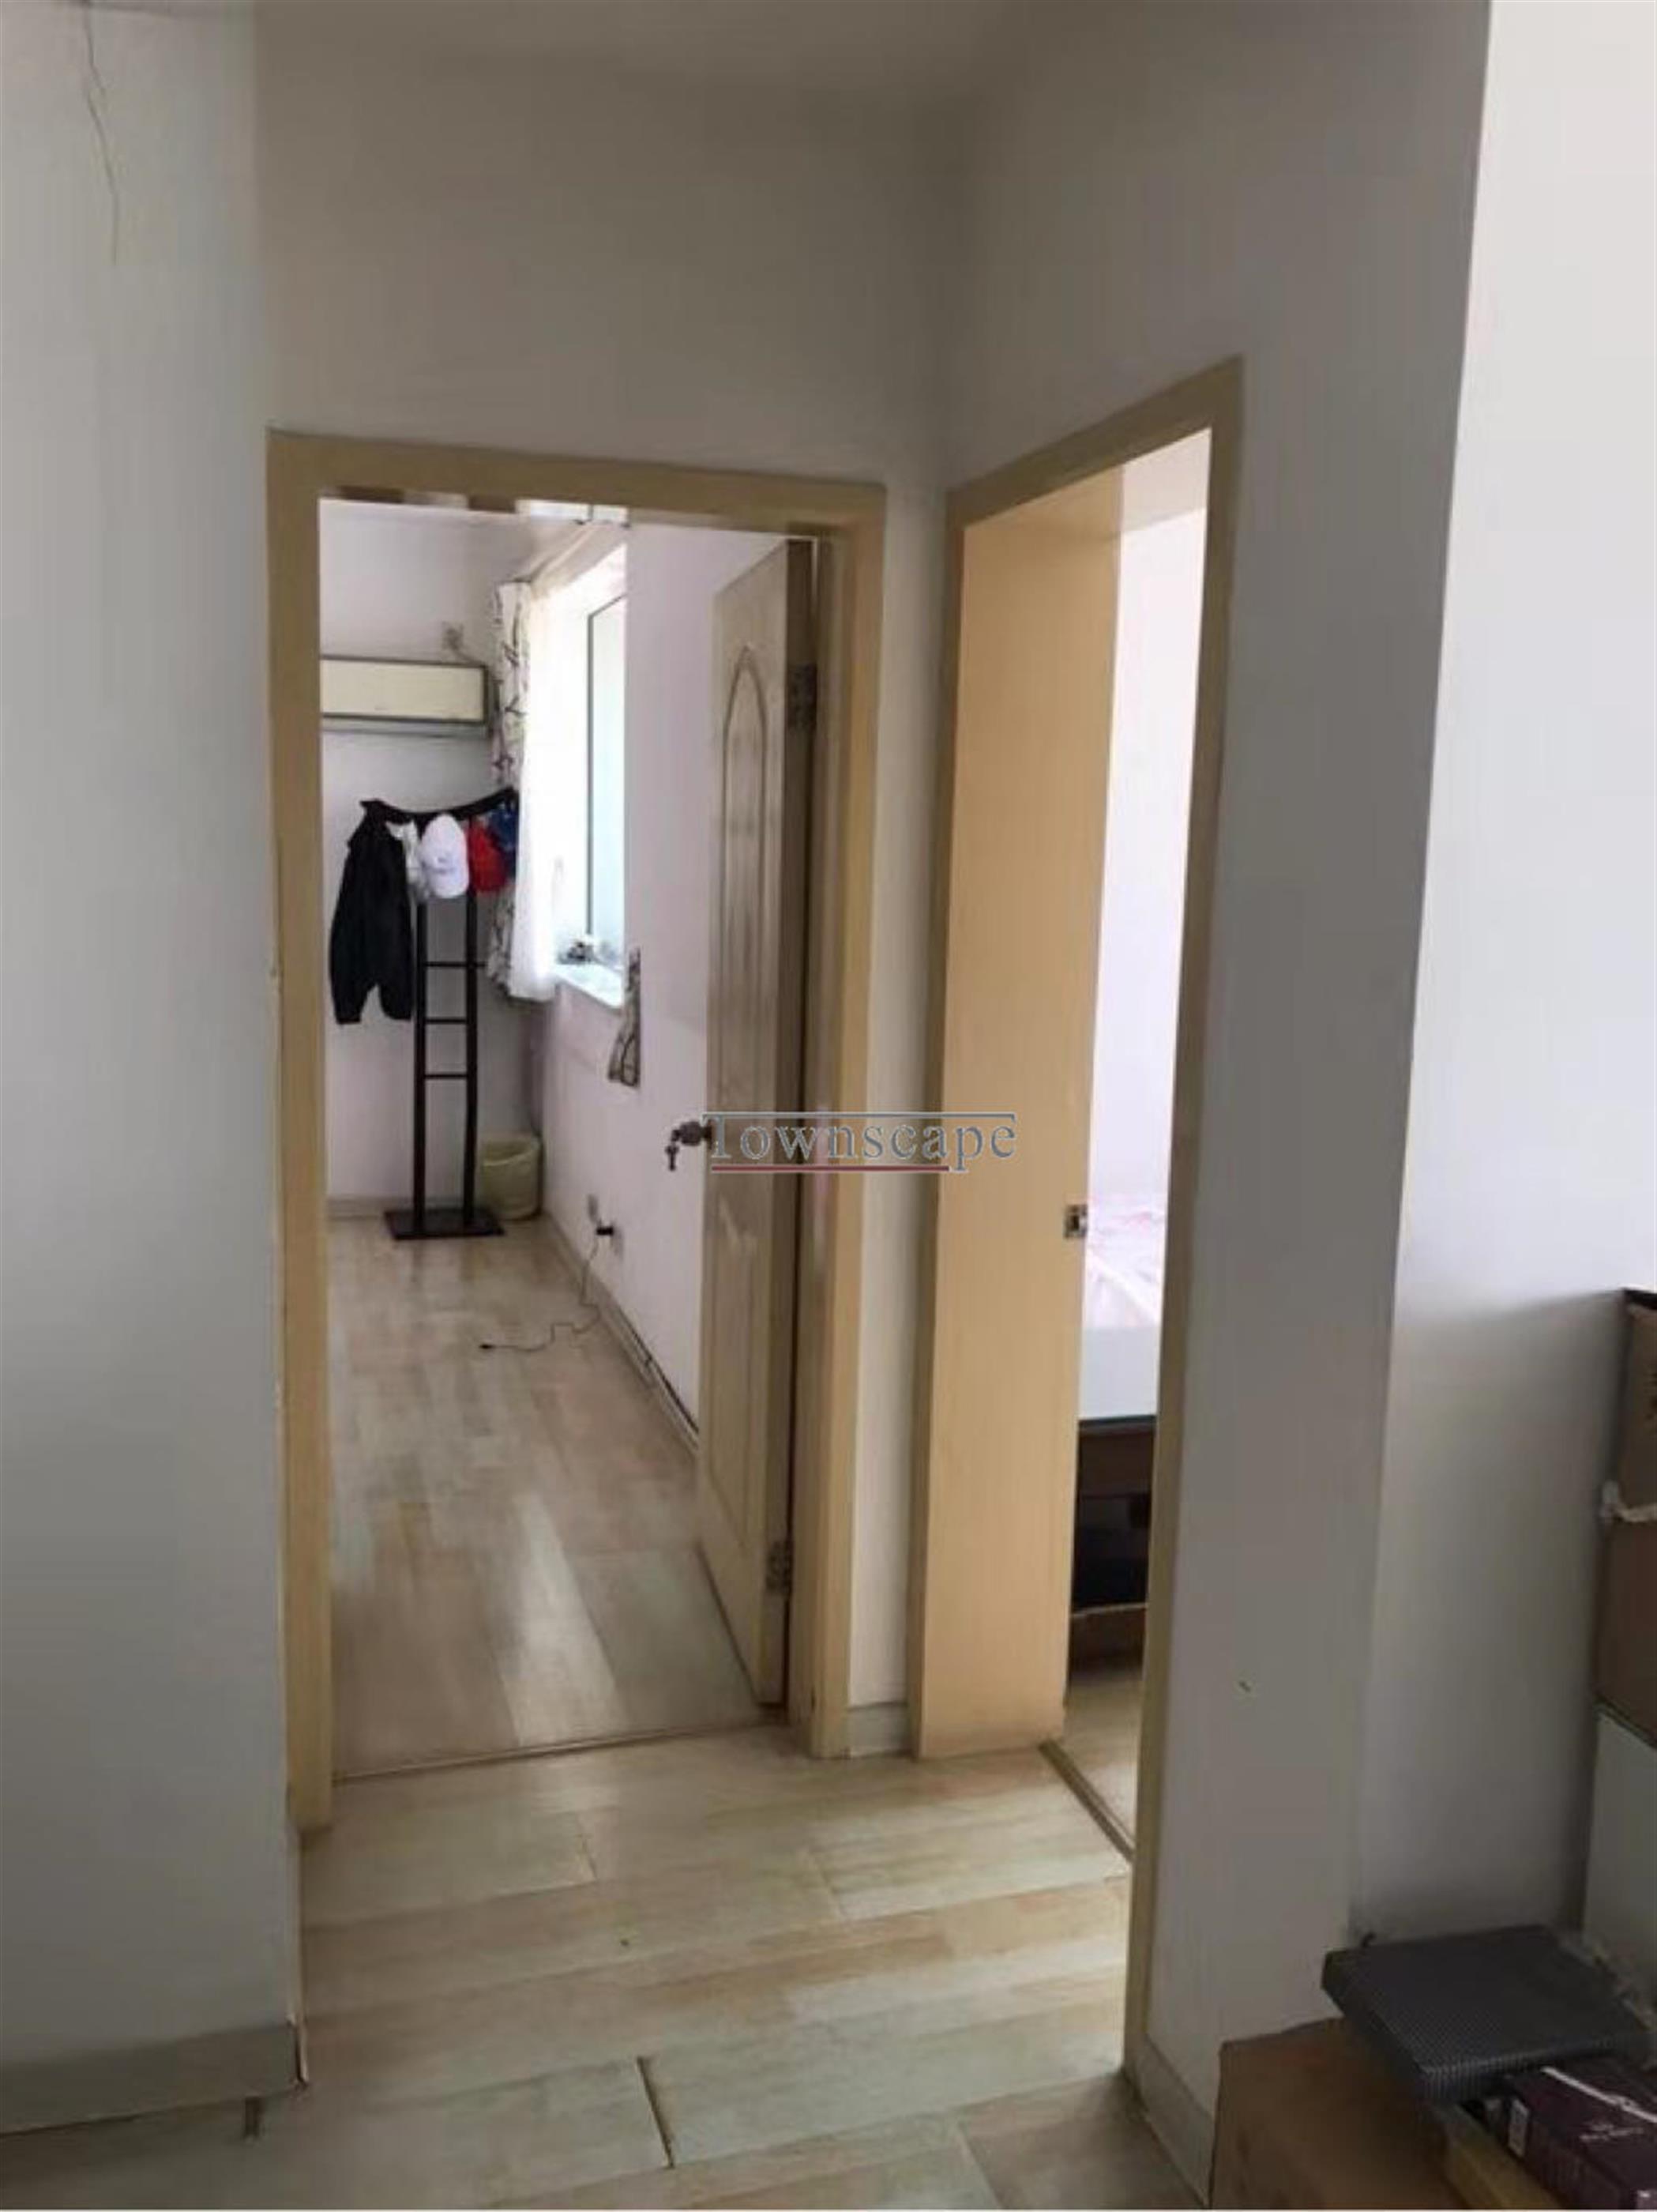 nice floors Great Value Spacious Bright 2BR Apartment Near LN 4/12 for Rent in Shanghai